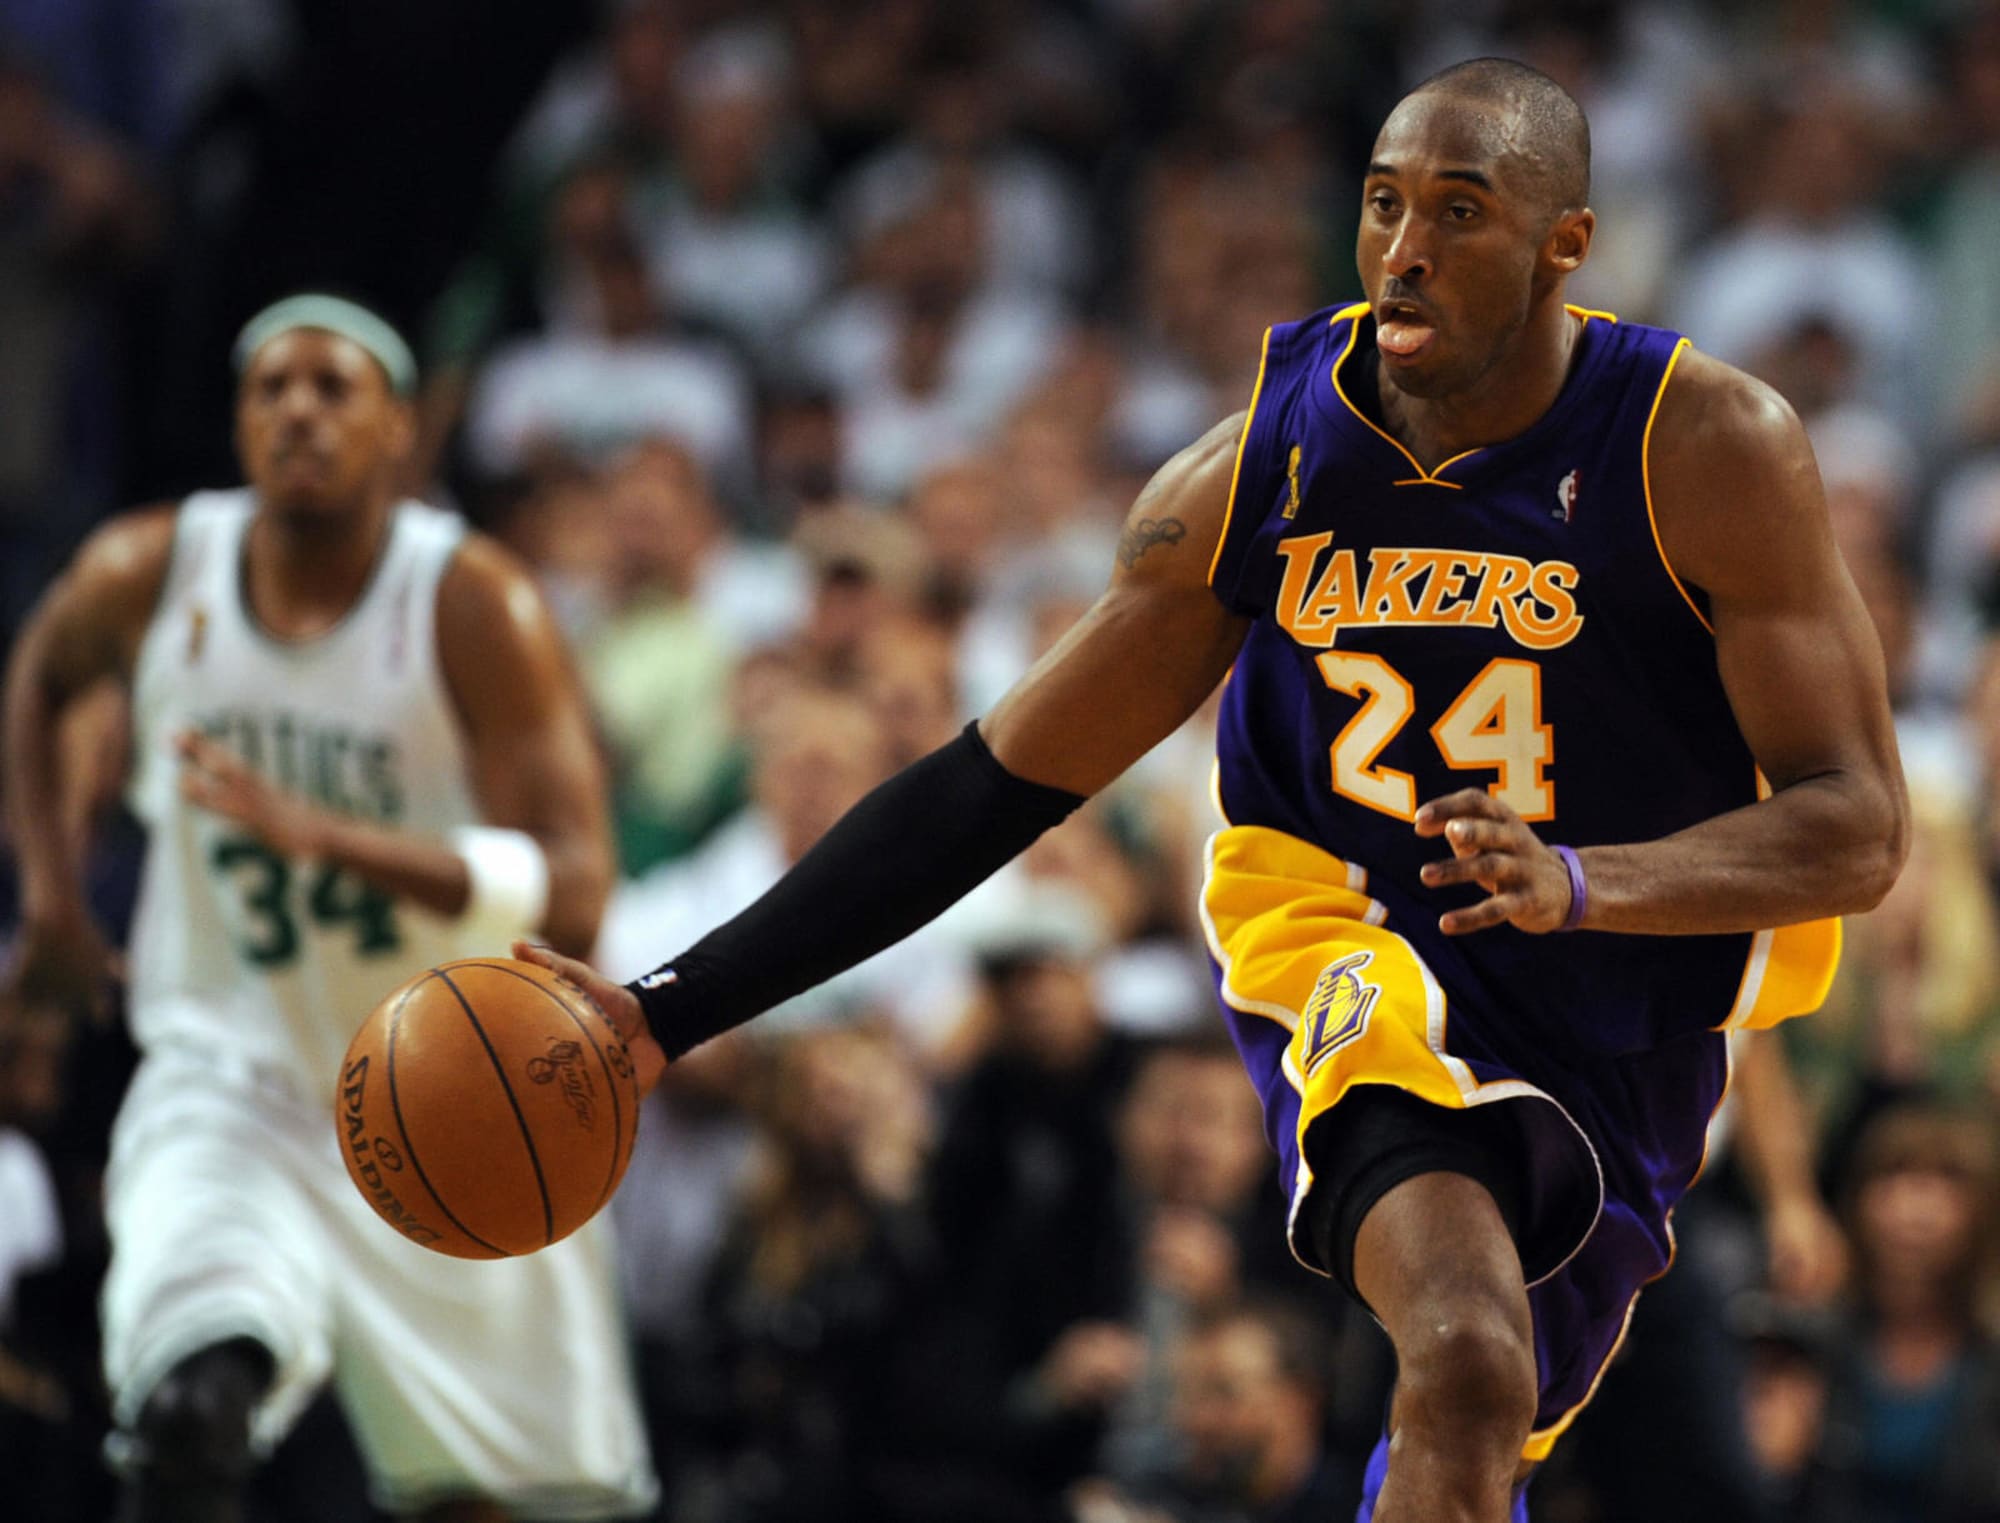 How a 2004 NBA Finals win over Shaq, Kobe and the Lakers cemented